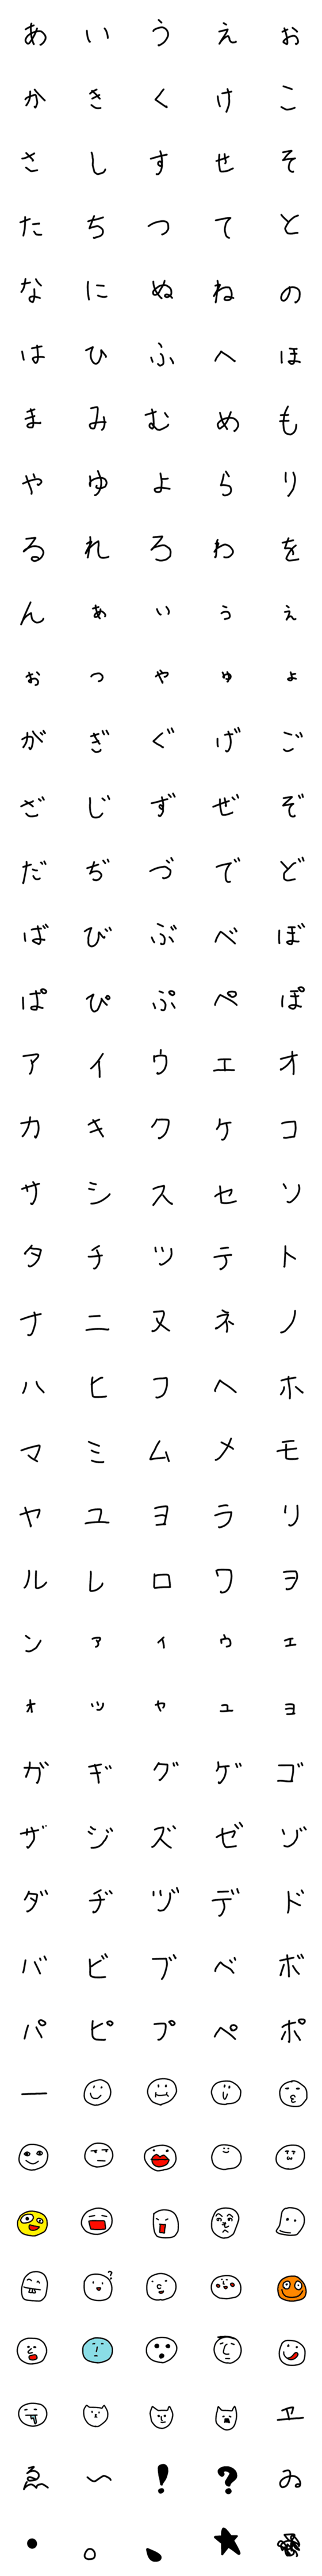 [LINE絵文字]マイ文字の画像一覧